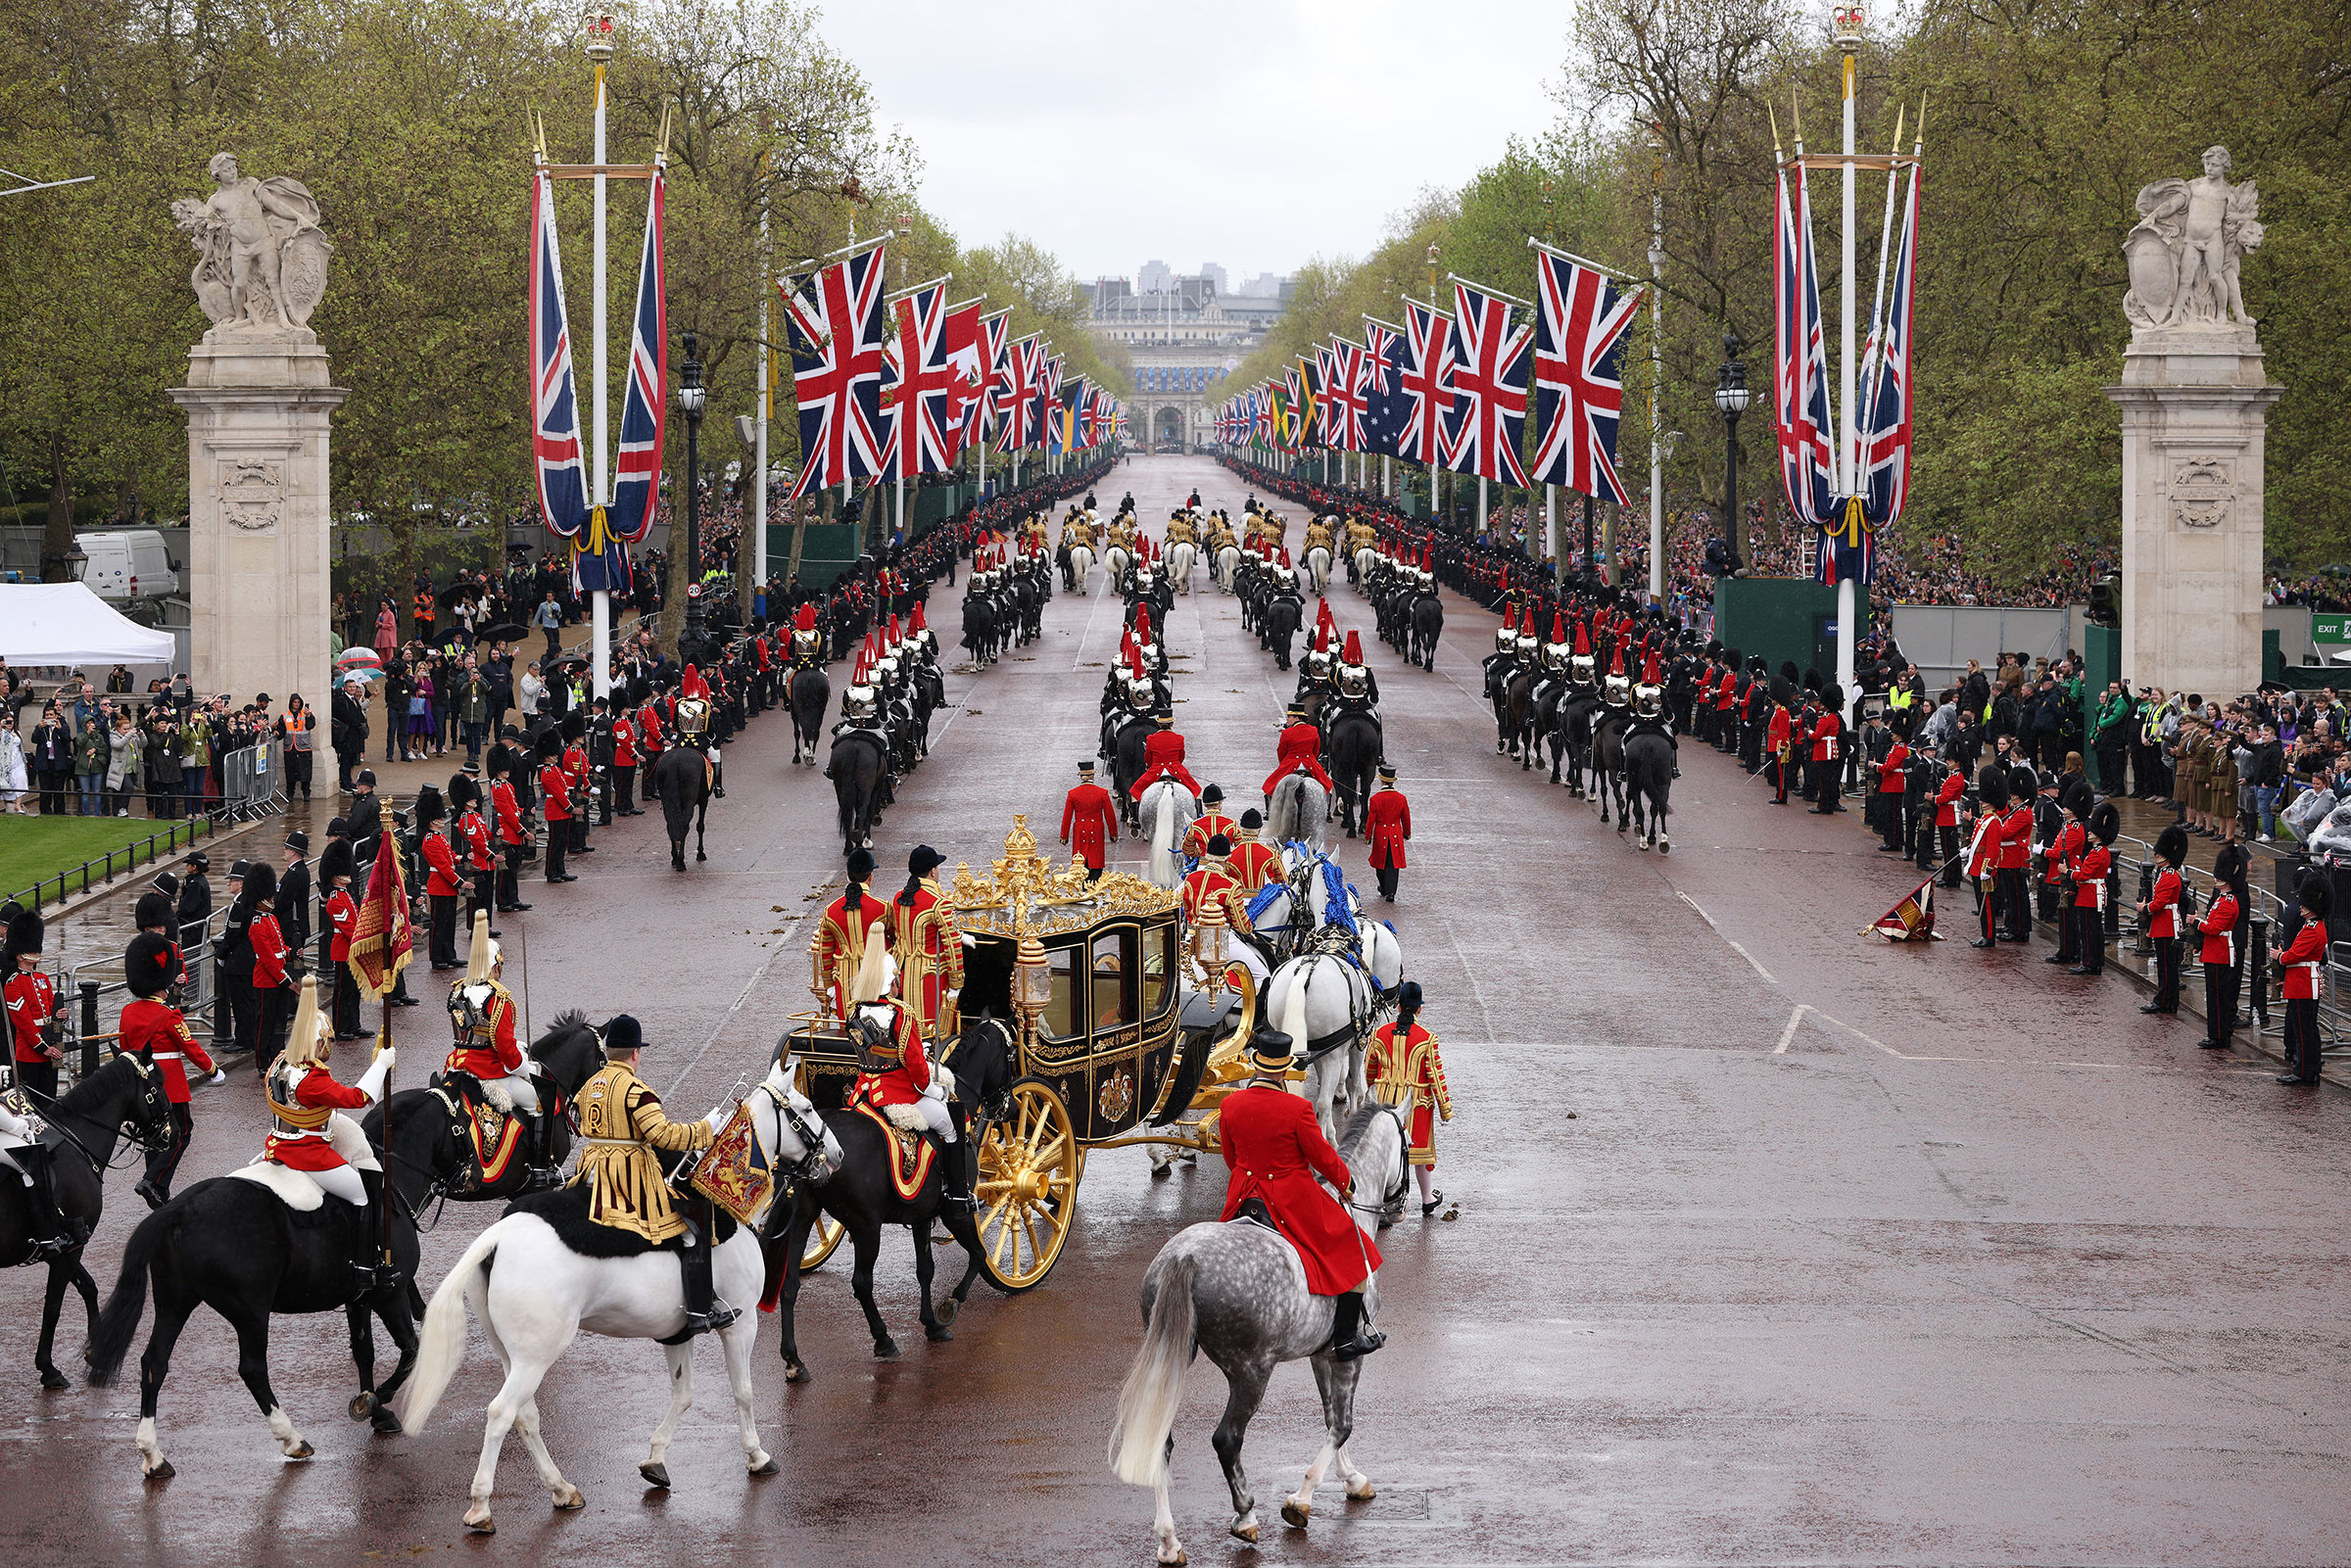 King Charles III and Camilla, Queen Consort, traveling in the Diamond Jubilee Coach, flanked by over a thousand Armed Forces route liners and The Sovereign’s Escort of the Household Cavalry sets off along the Mall from Buckingham Palace on route to Westminster Abbey. (Dan Kitwood—Getty Images)